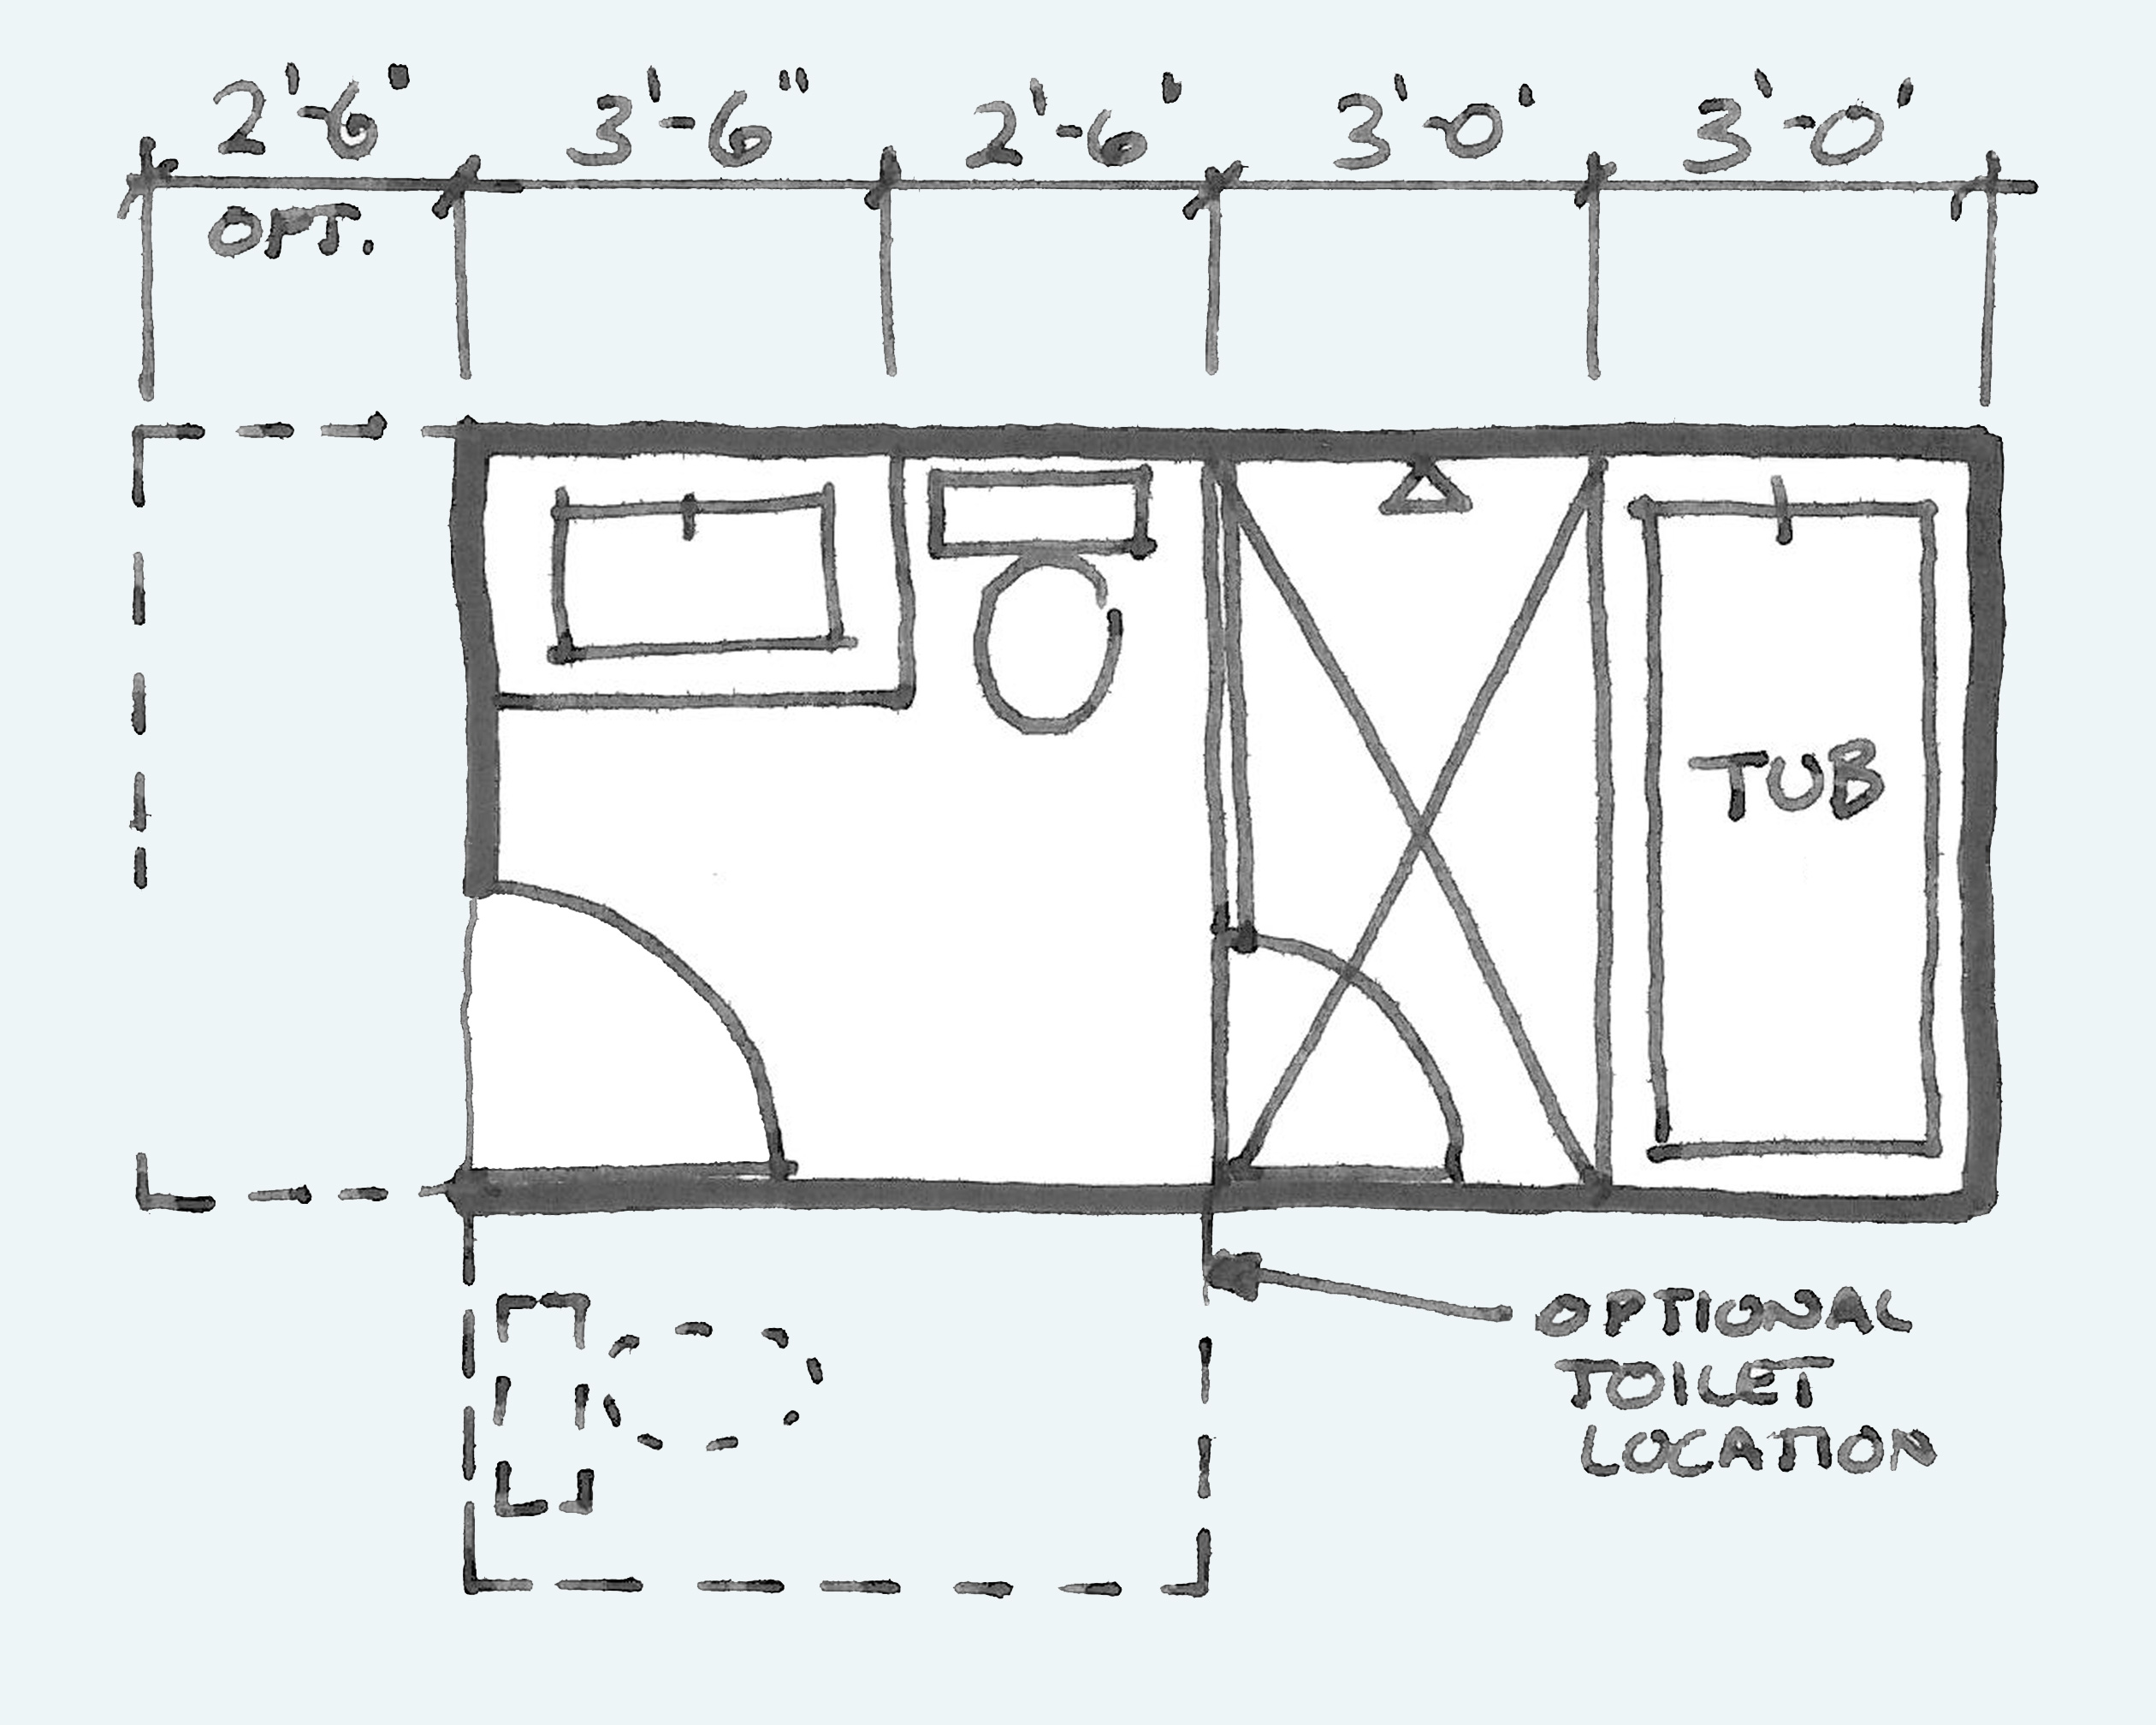 Common Bathroom Floor Plans Rules Of Thumb For Layout Board Vellum